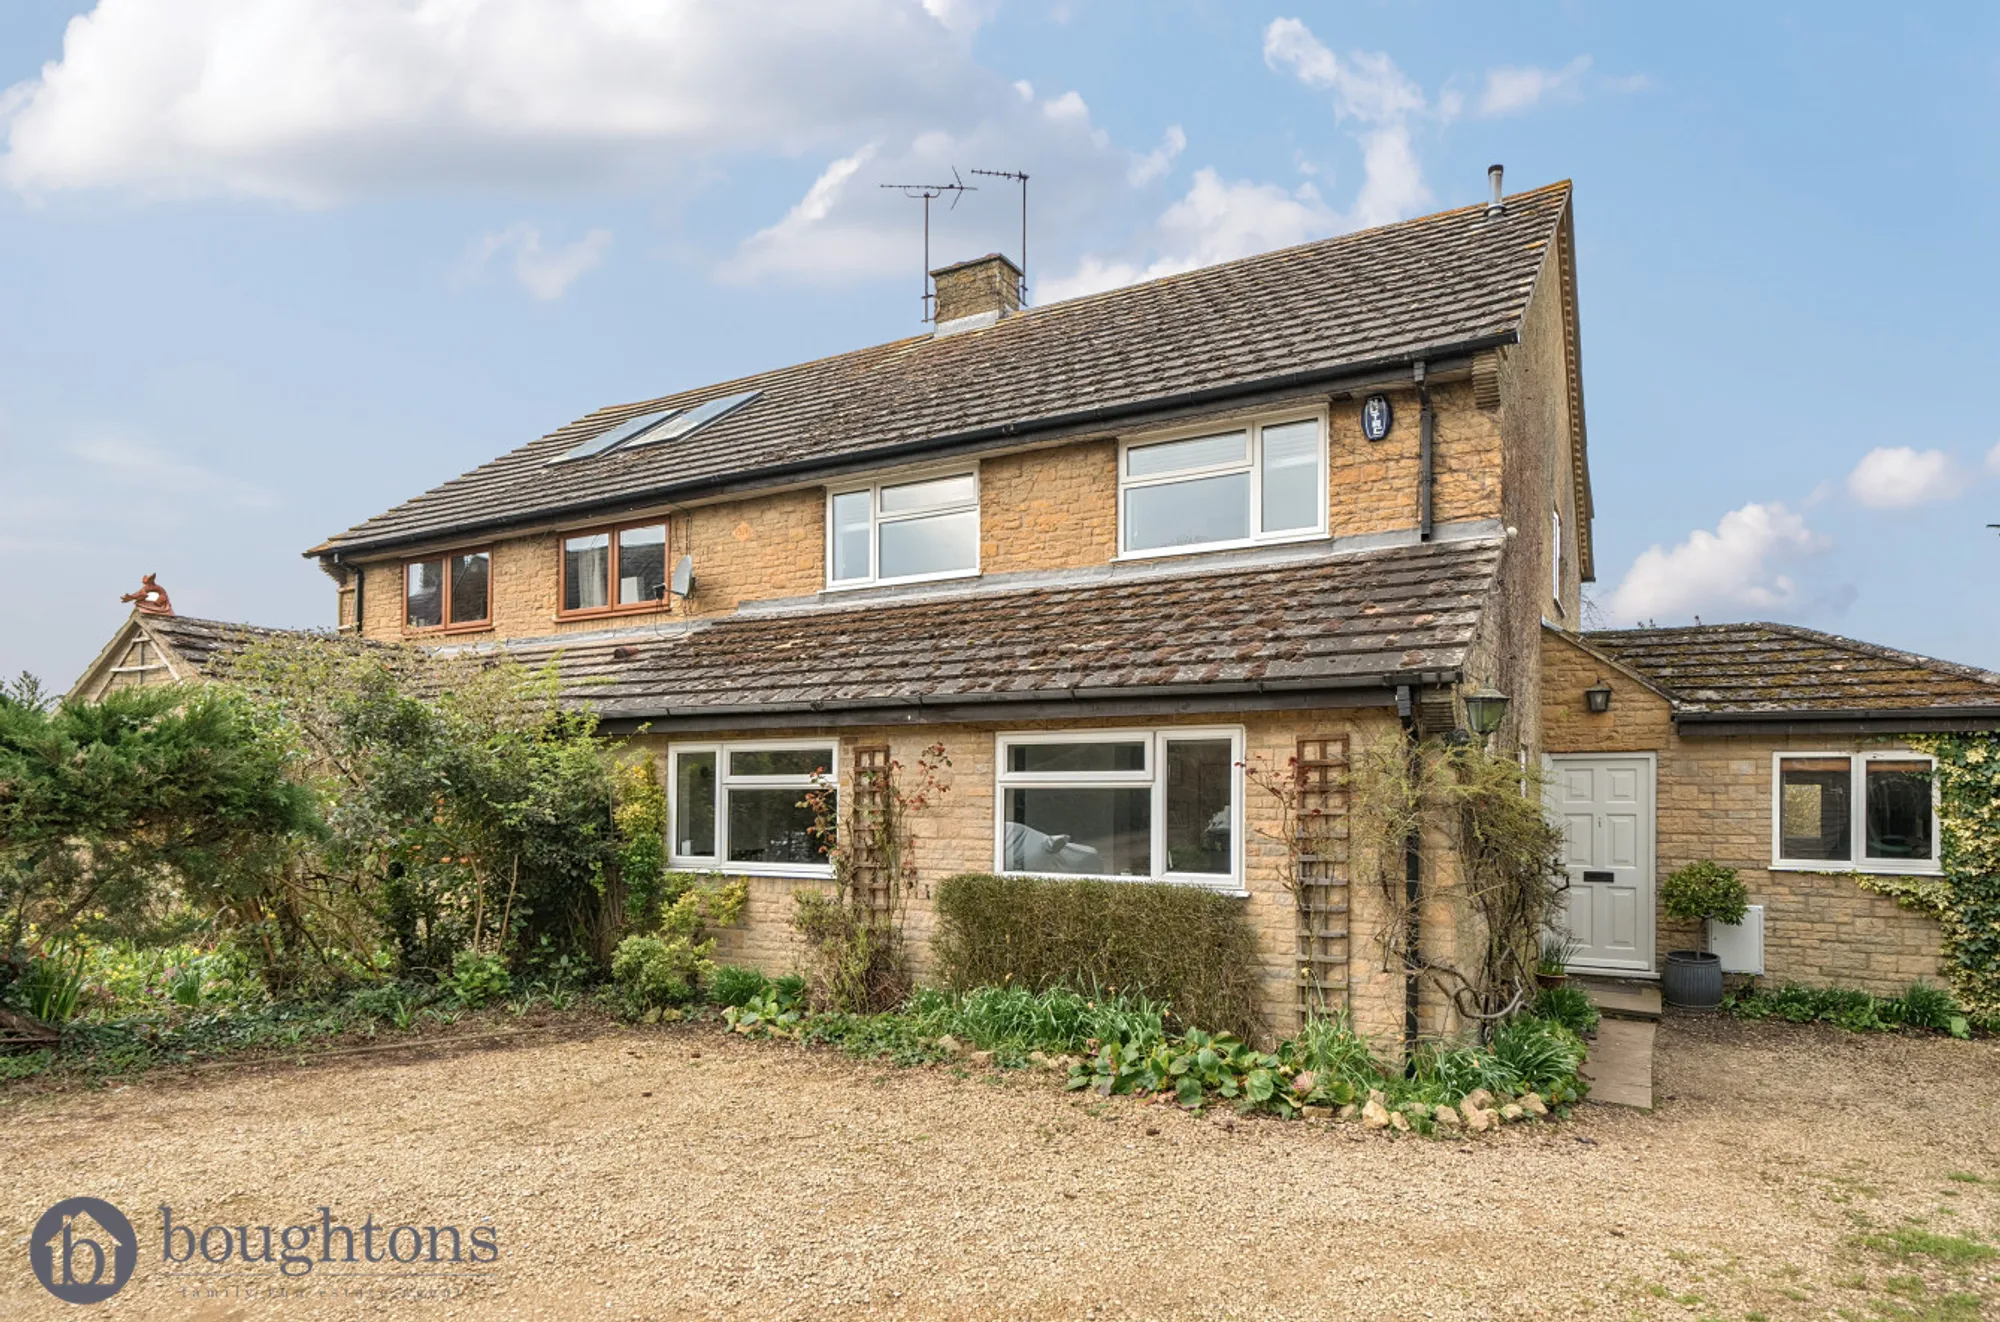 3 bed semi-detached house for sale in Prestidge Row, Daventry - Property Image 1